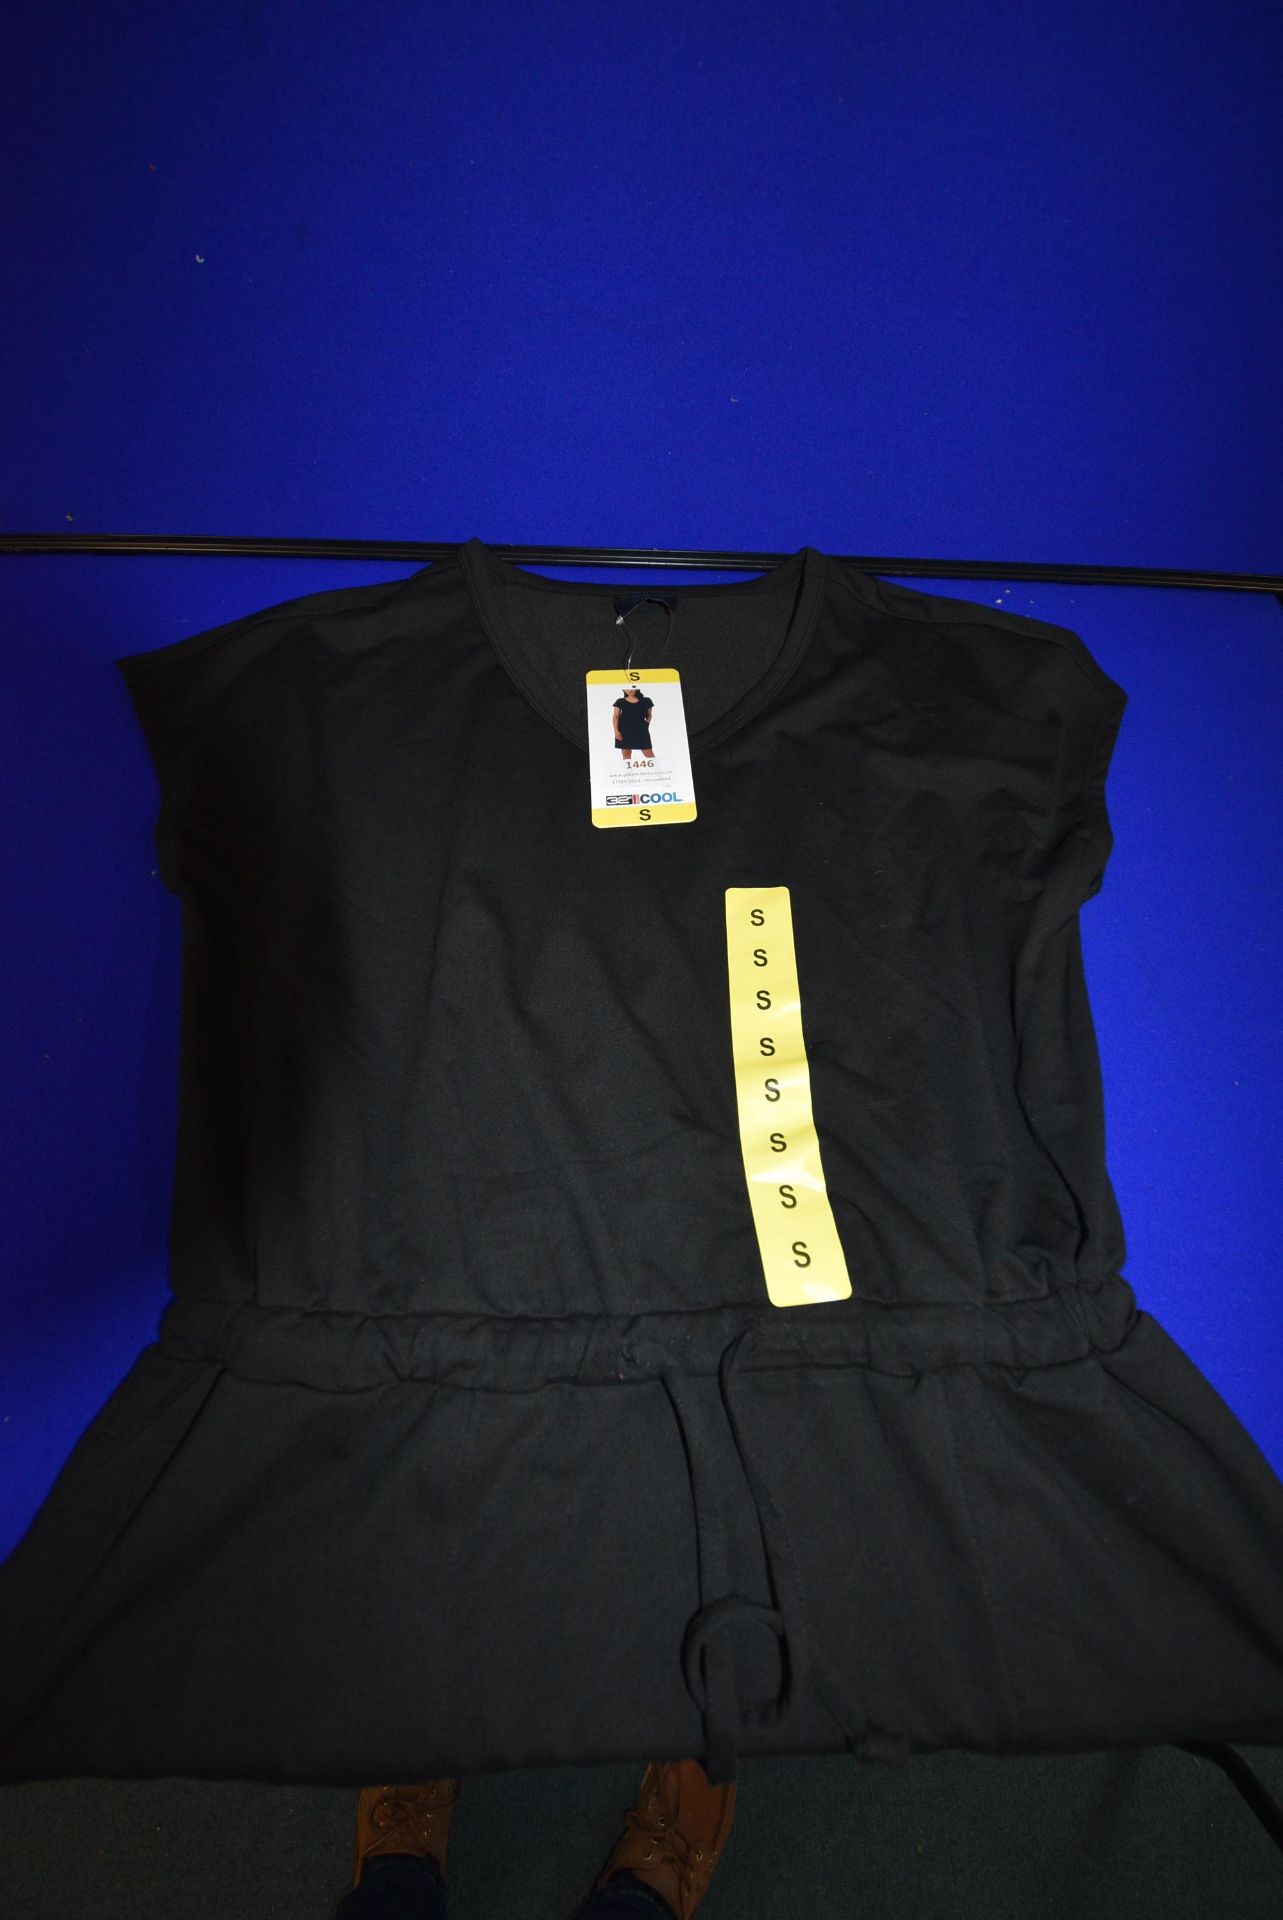 *32 Degrees Cool Lady’s Sports Dress in Black Size: S